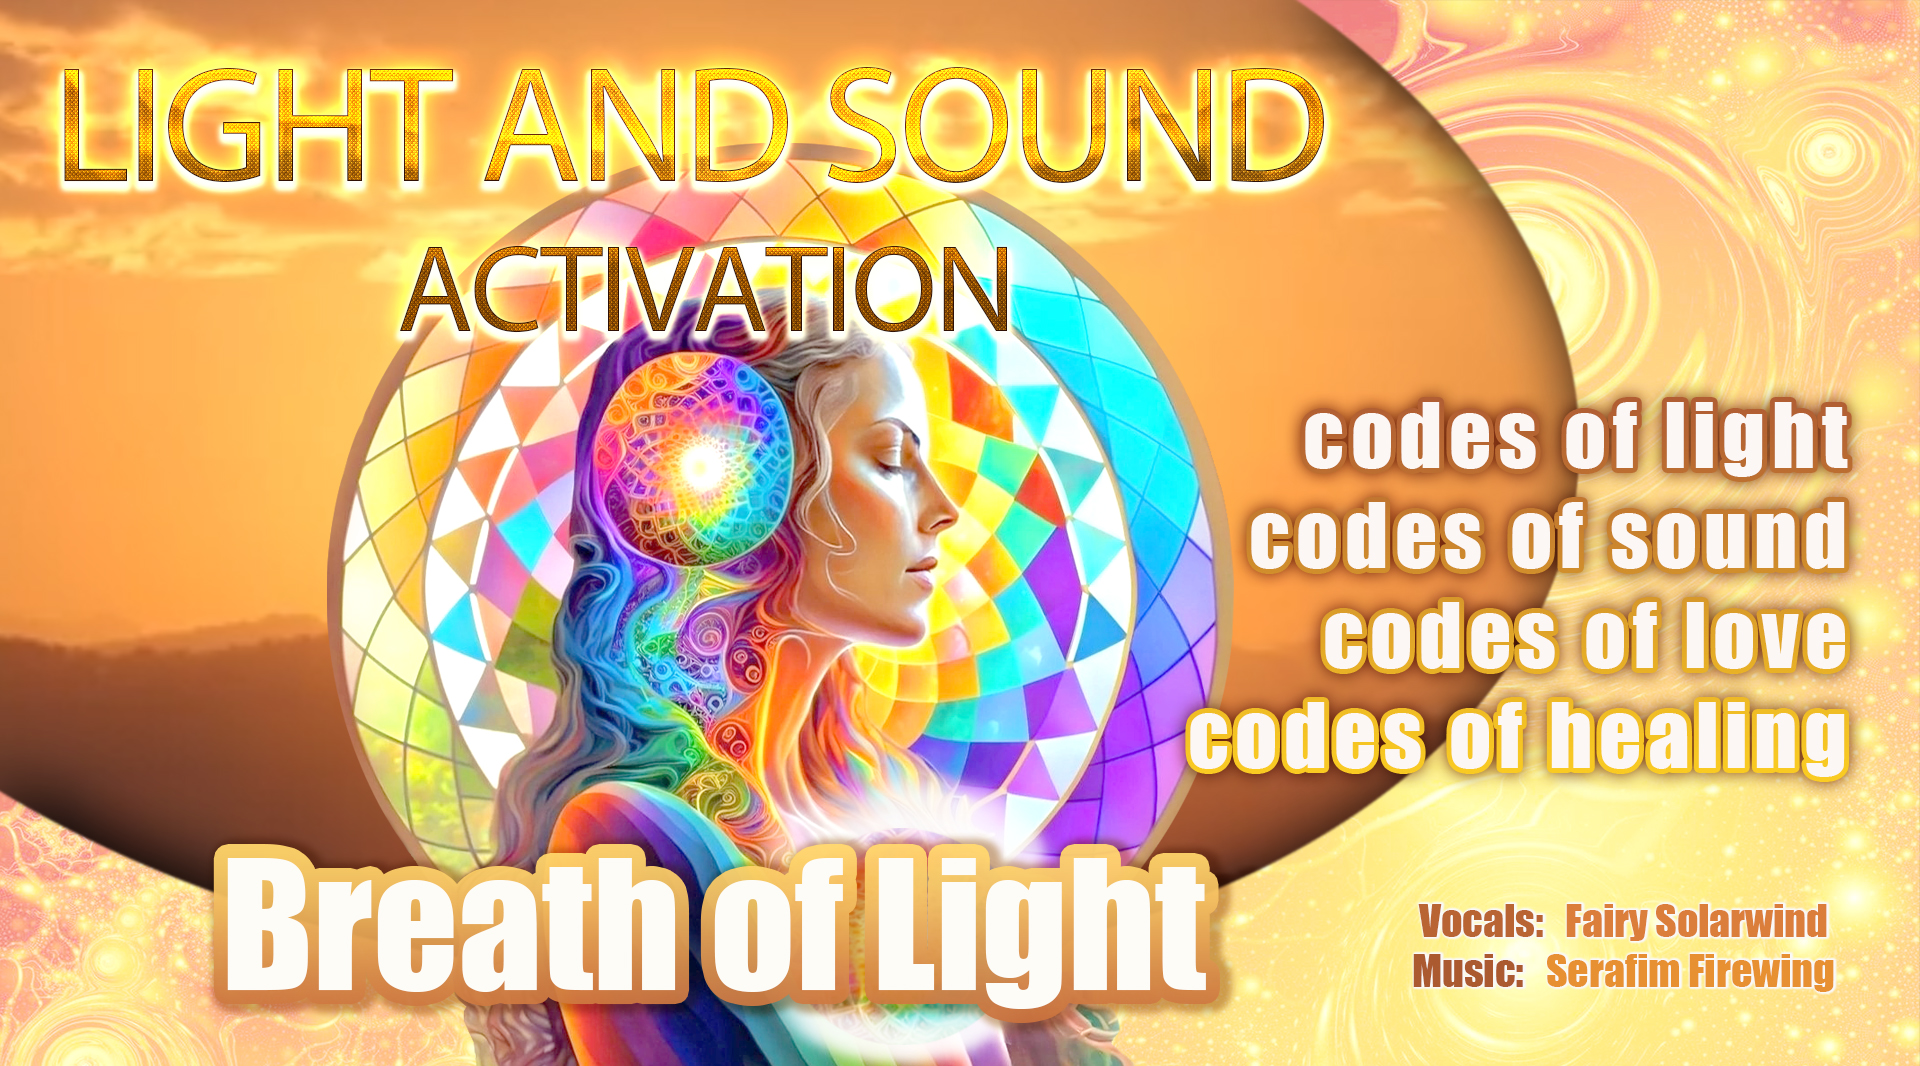 The Breath of Light. Light and Sound Activation.